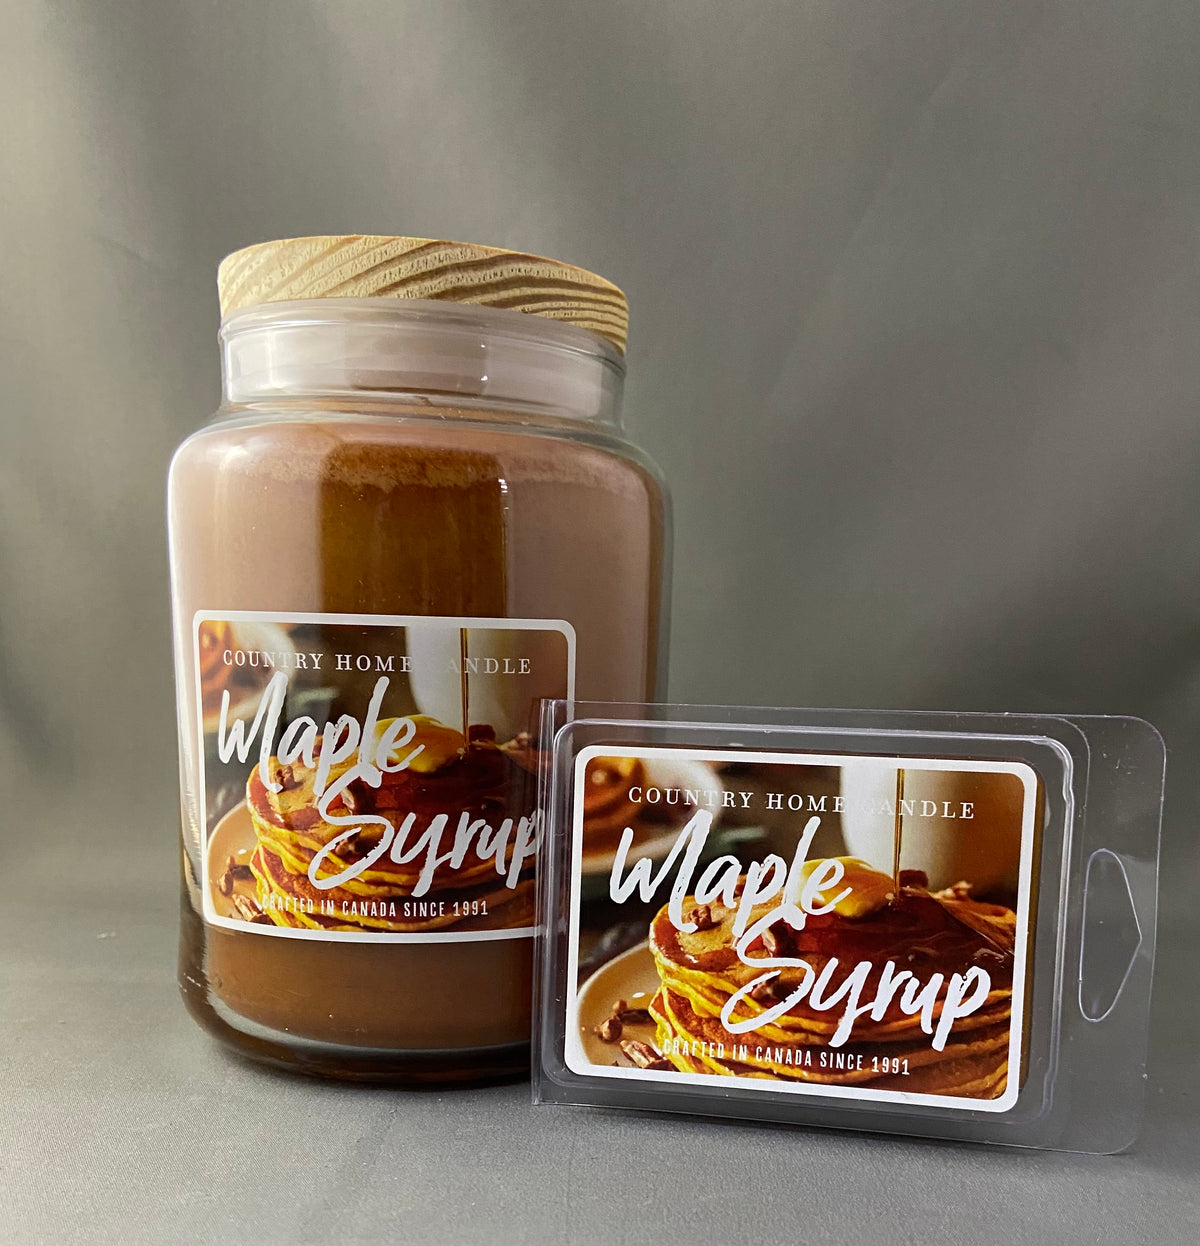 Country Home Maple Syrup Candle and Wax Melts